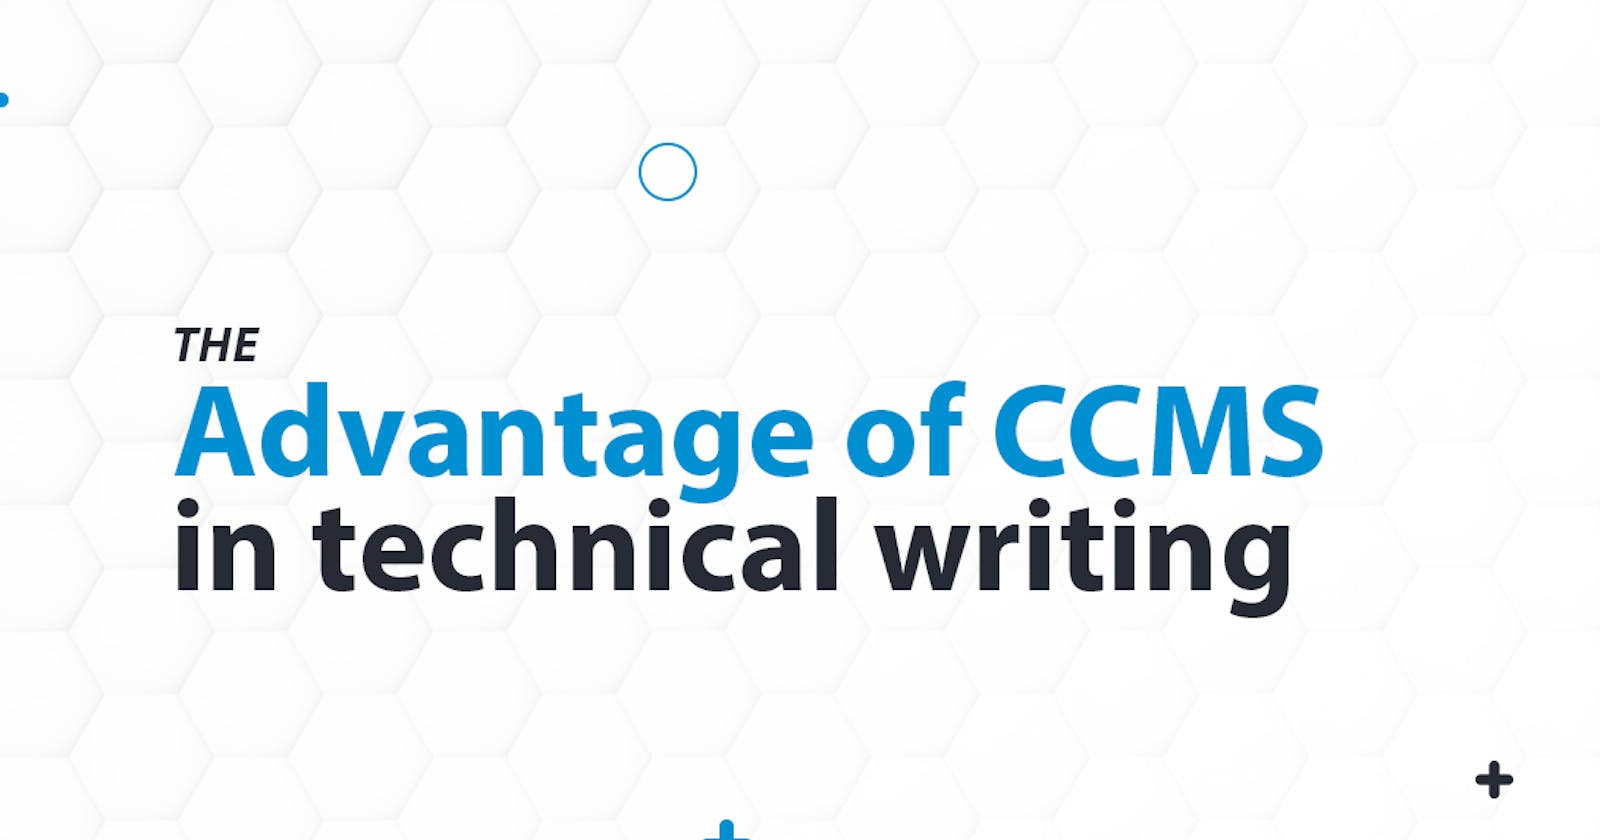 The advantage of CCMS in technical writing